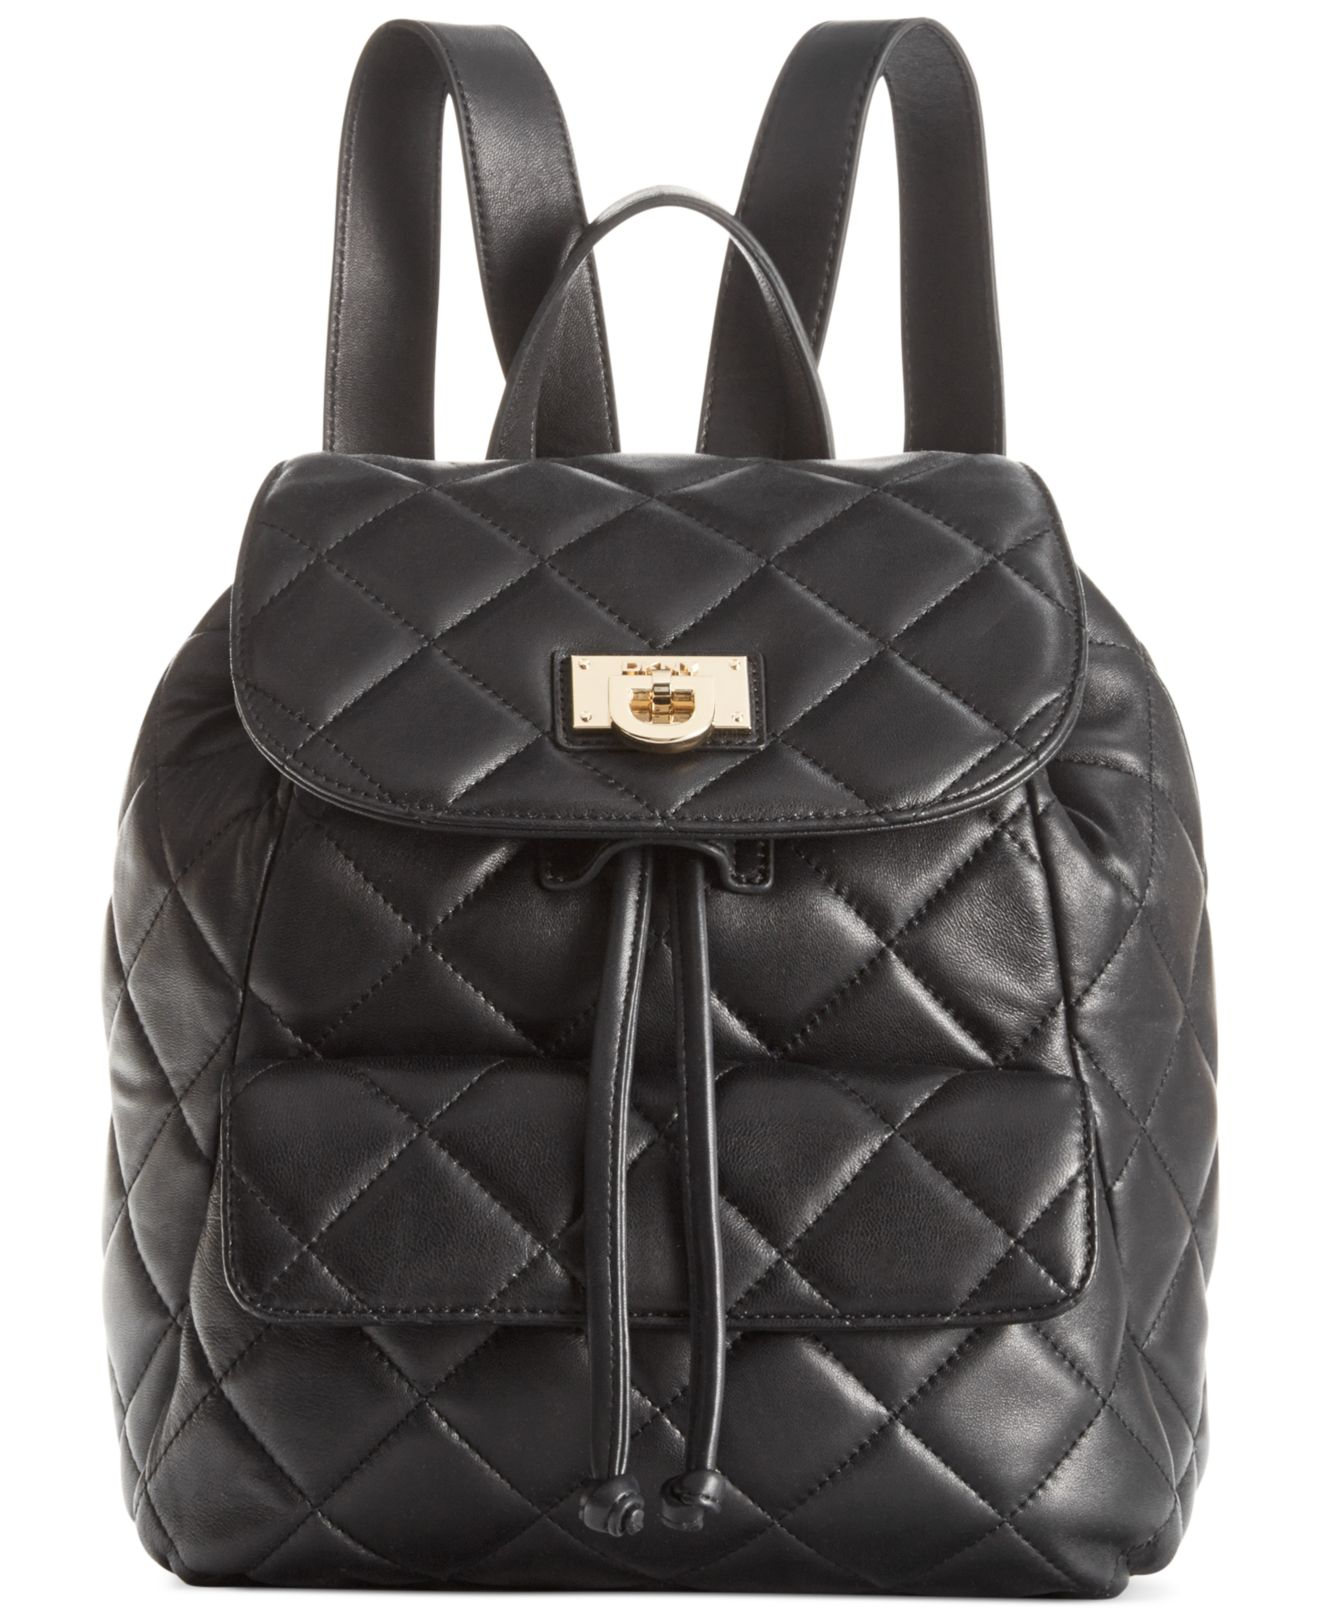 DKNY Gansevoort Quilted Nappa Leather Backpack in Black - Lyst